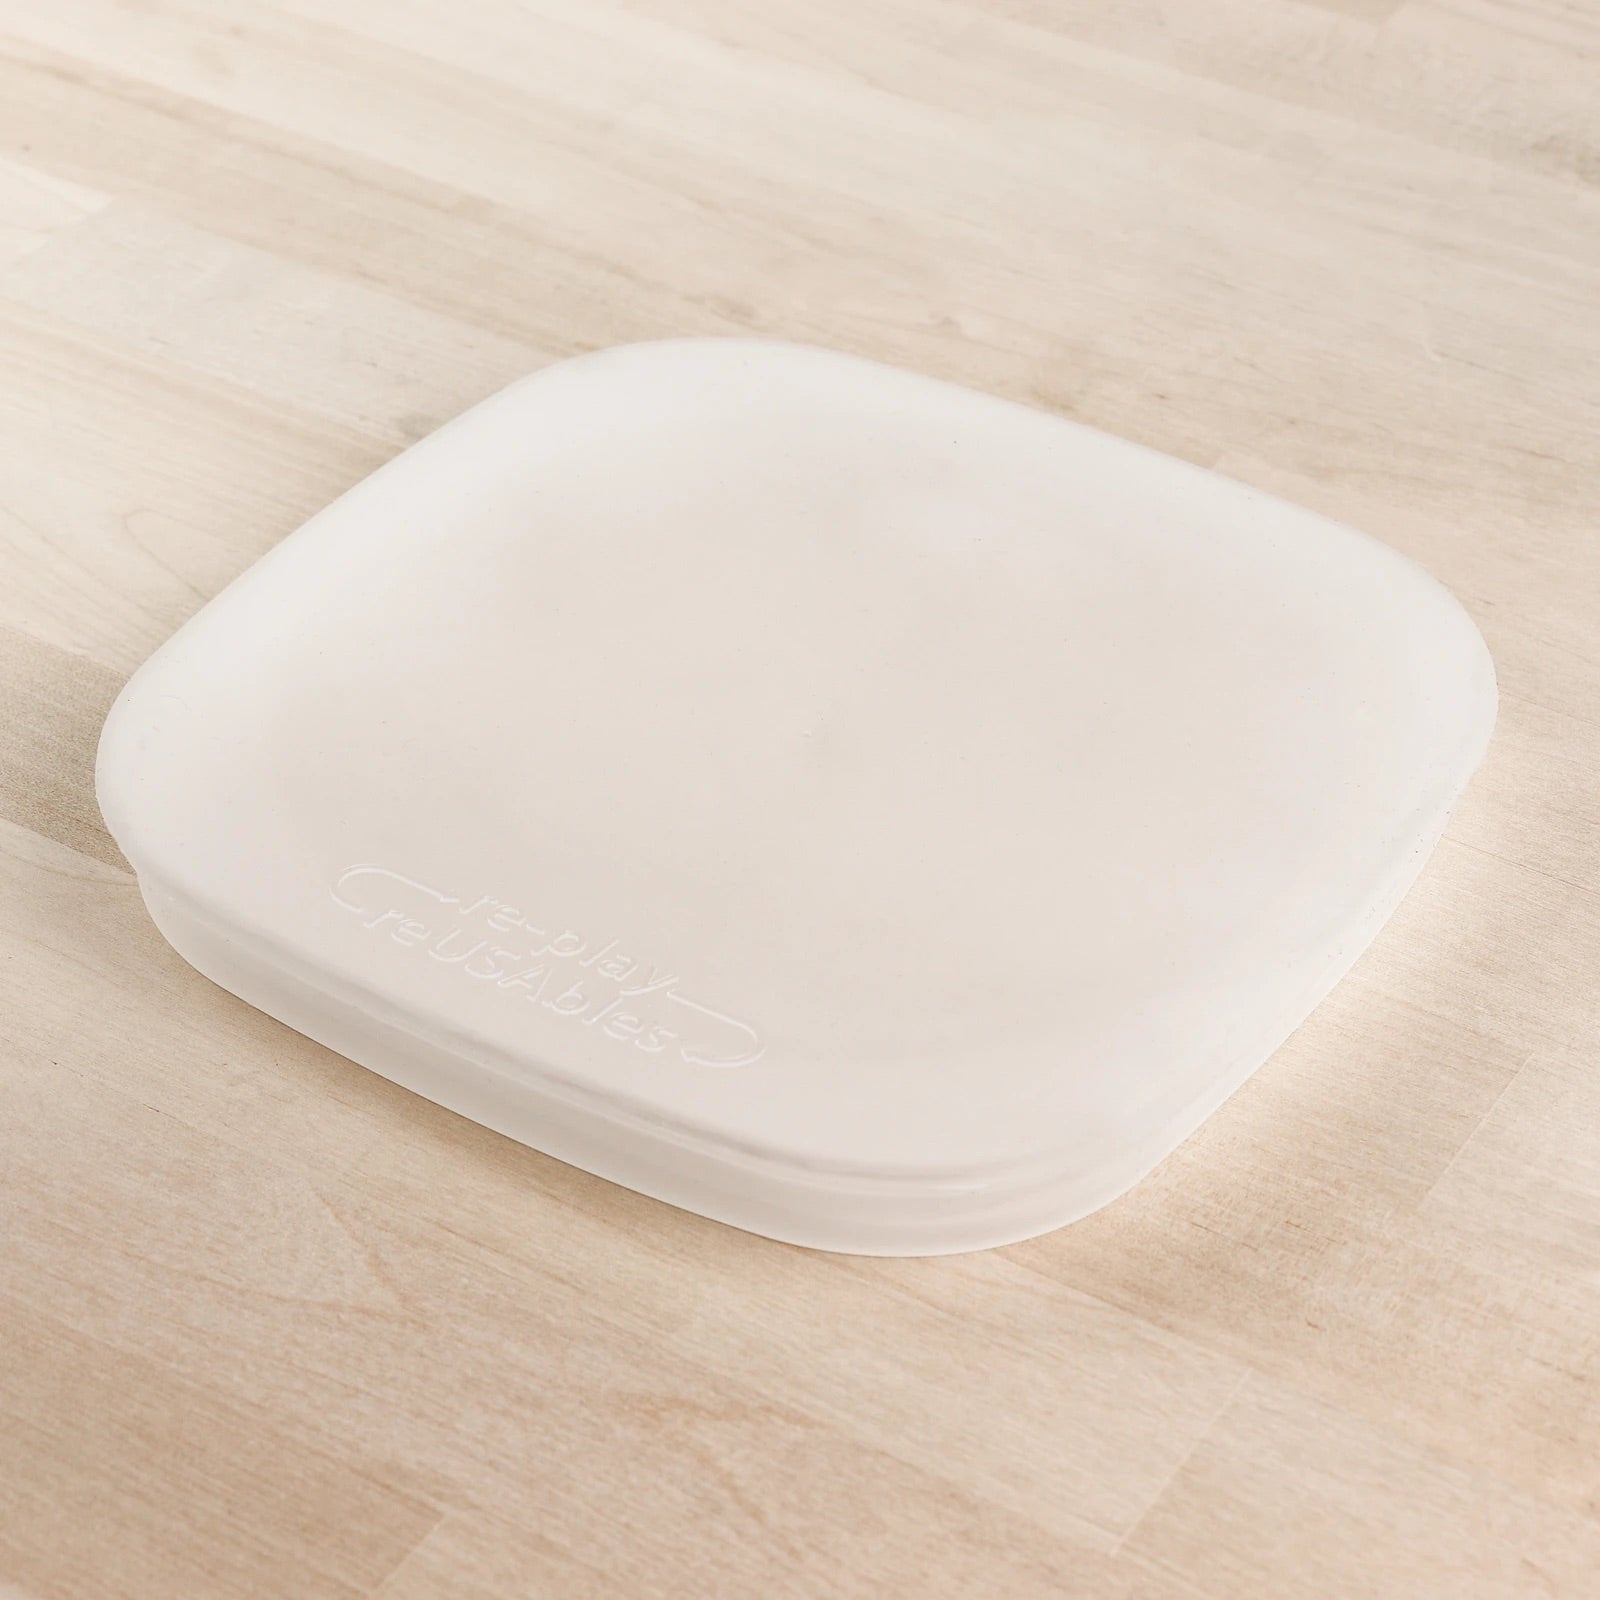 RePlay Silicone Flat Plate or Divided Plate Lid